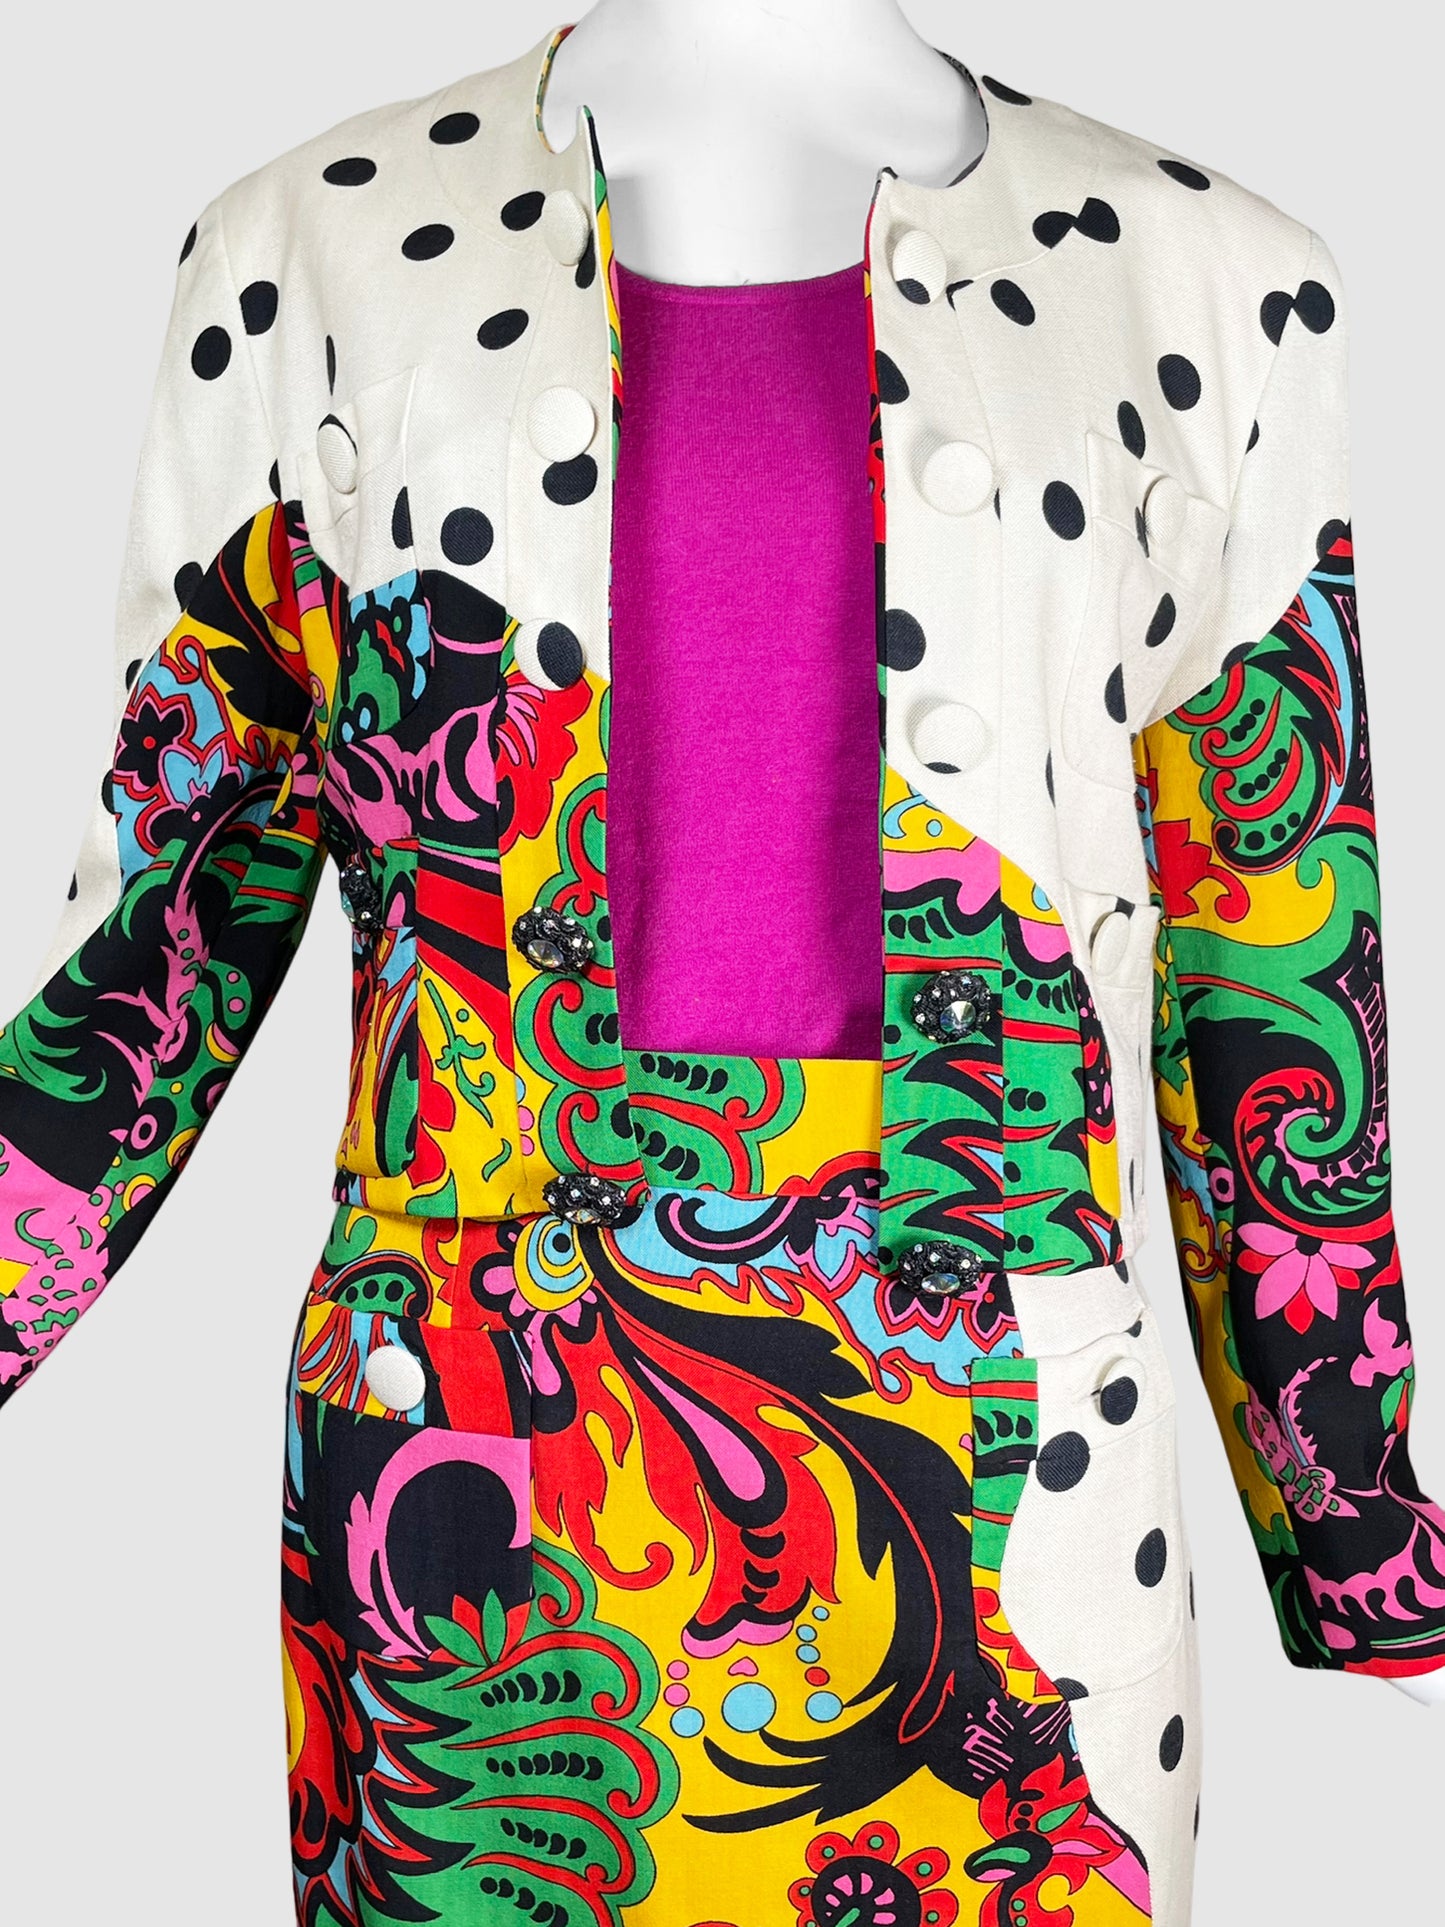 Moschino Abstract Print Skirt and Jacket Set - Size 6/8